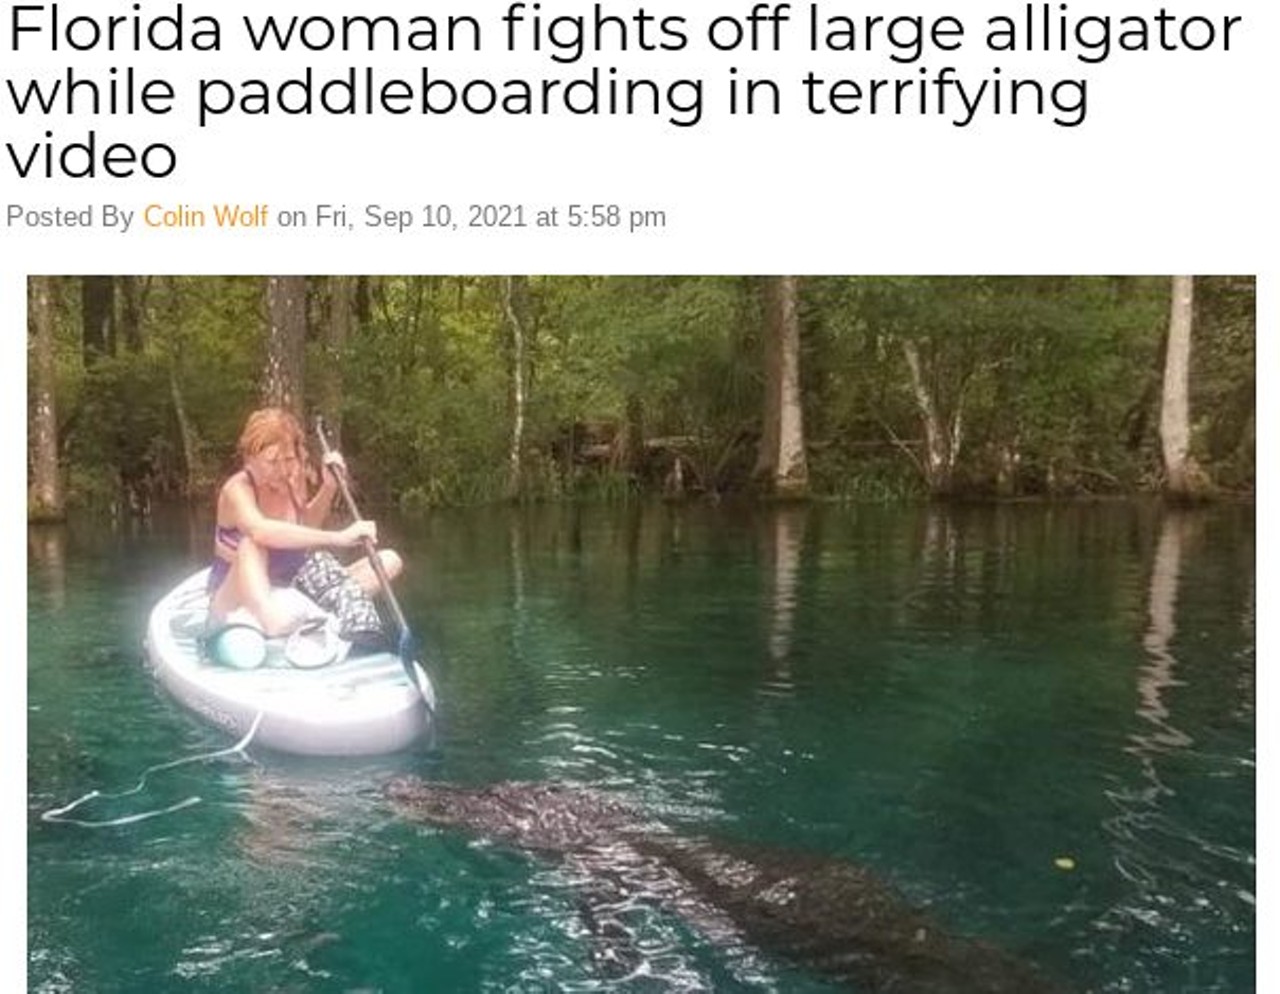 Florida woman fights off large alligator while paddleboarding in terrifying video
